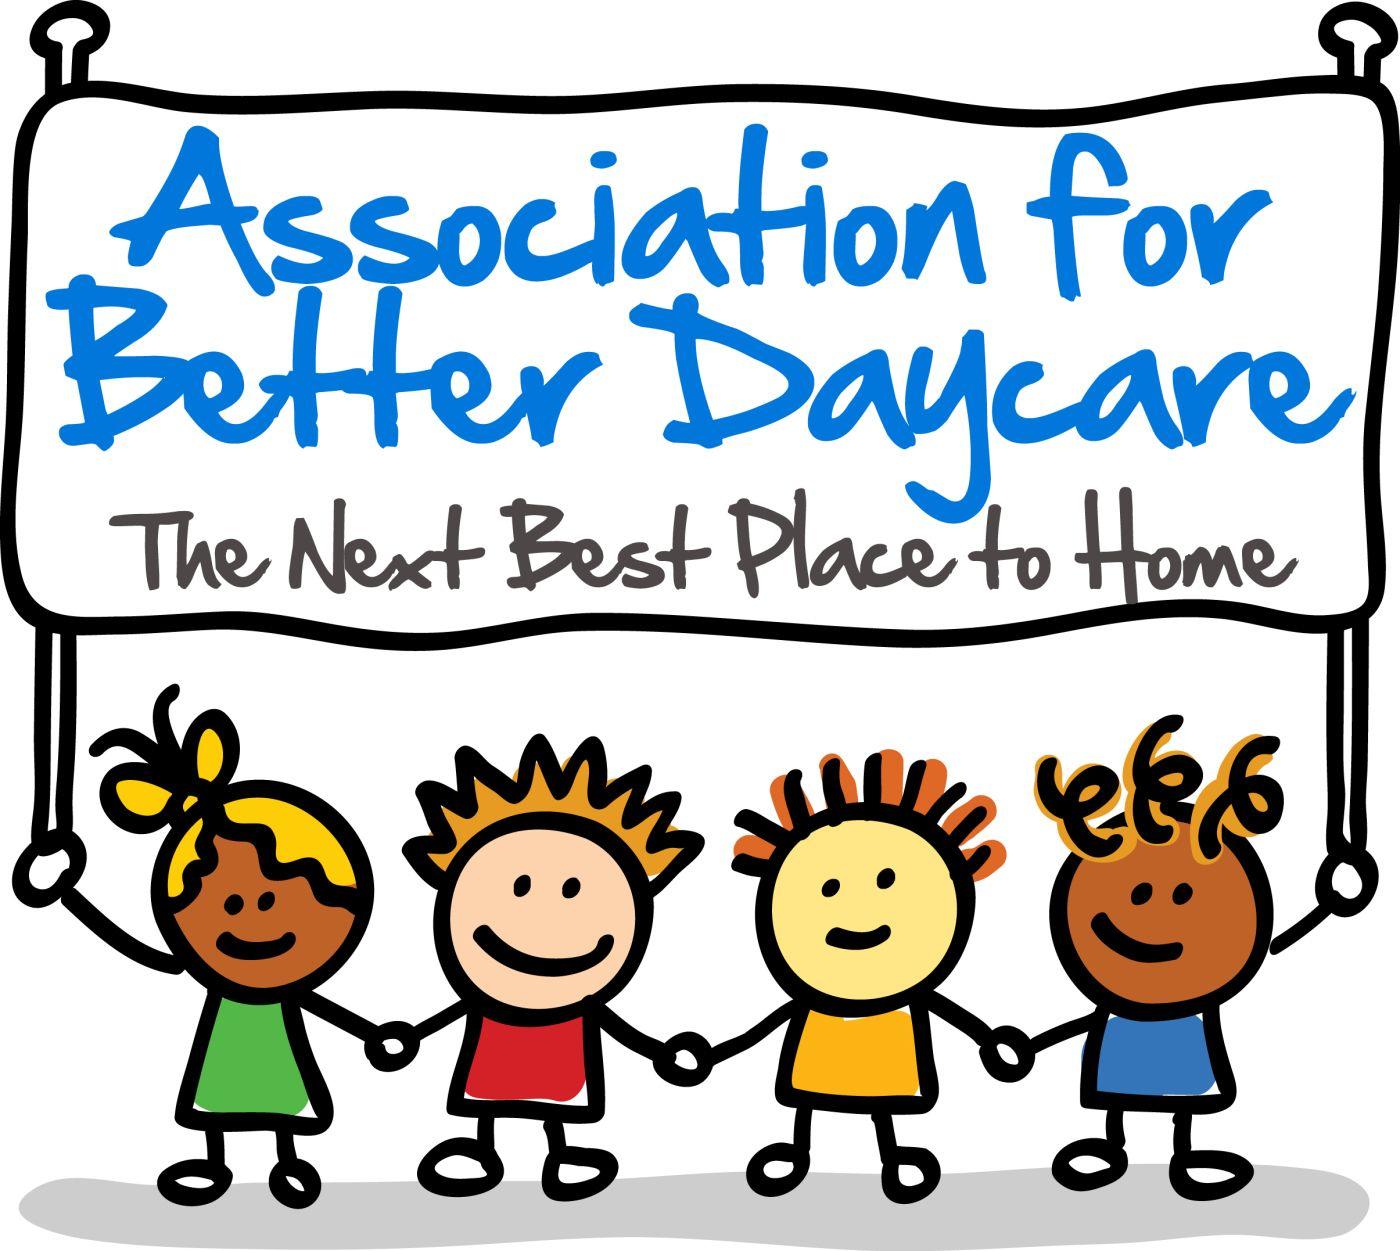 ABDC Logo - Association For Better Daycare Moorhead. The Next Best